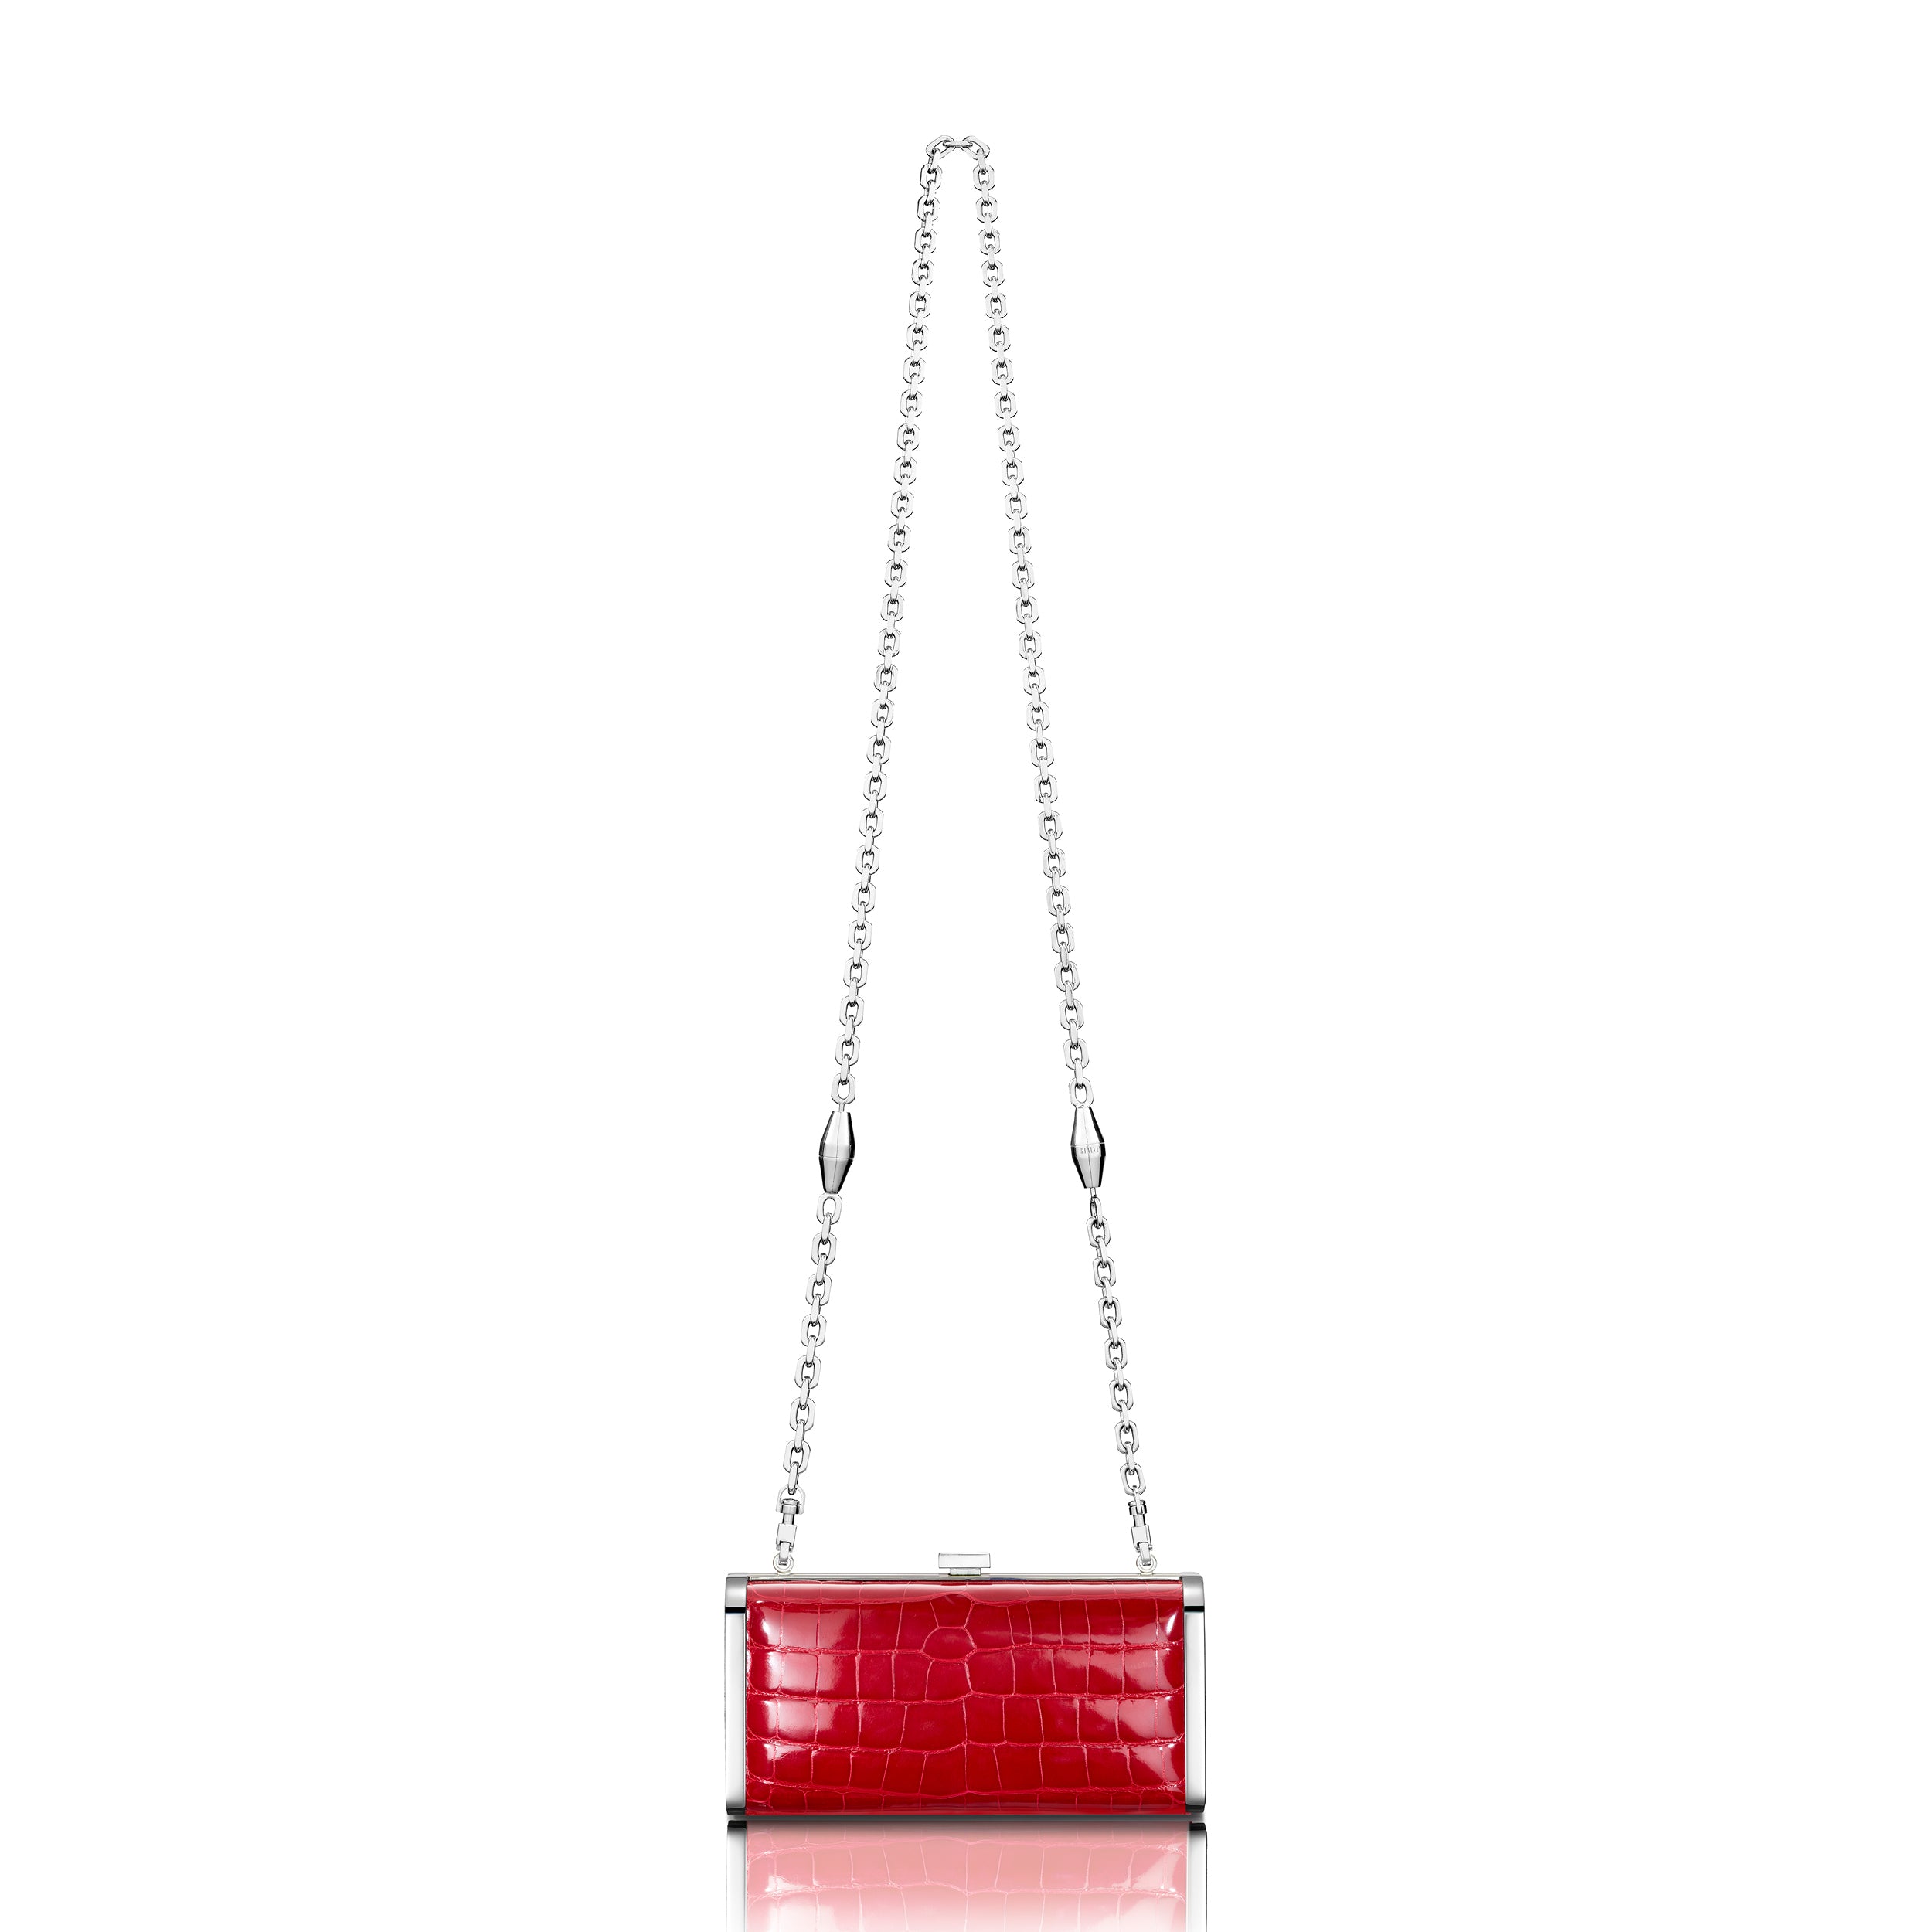 STALVEY Square Clutch in Red Alligator with Palladium Hardware Back View with Chain